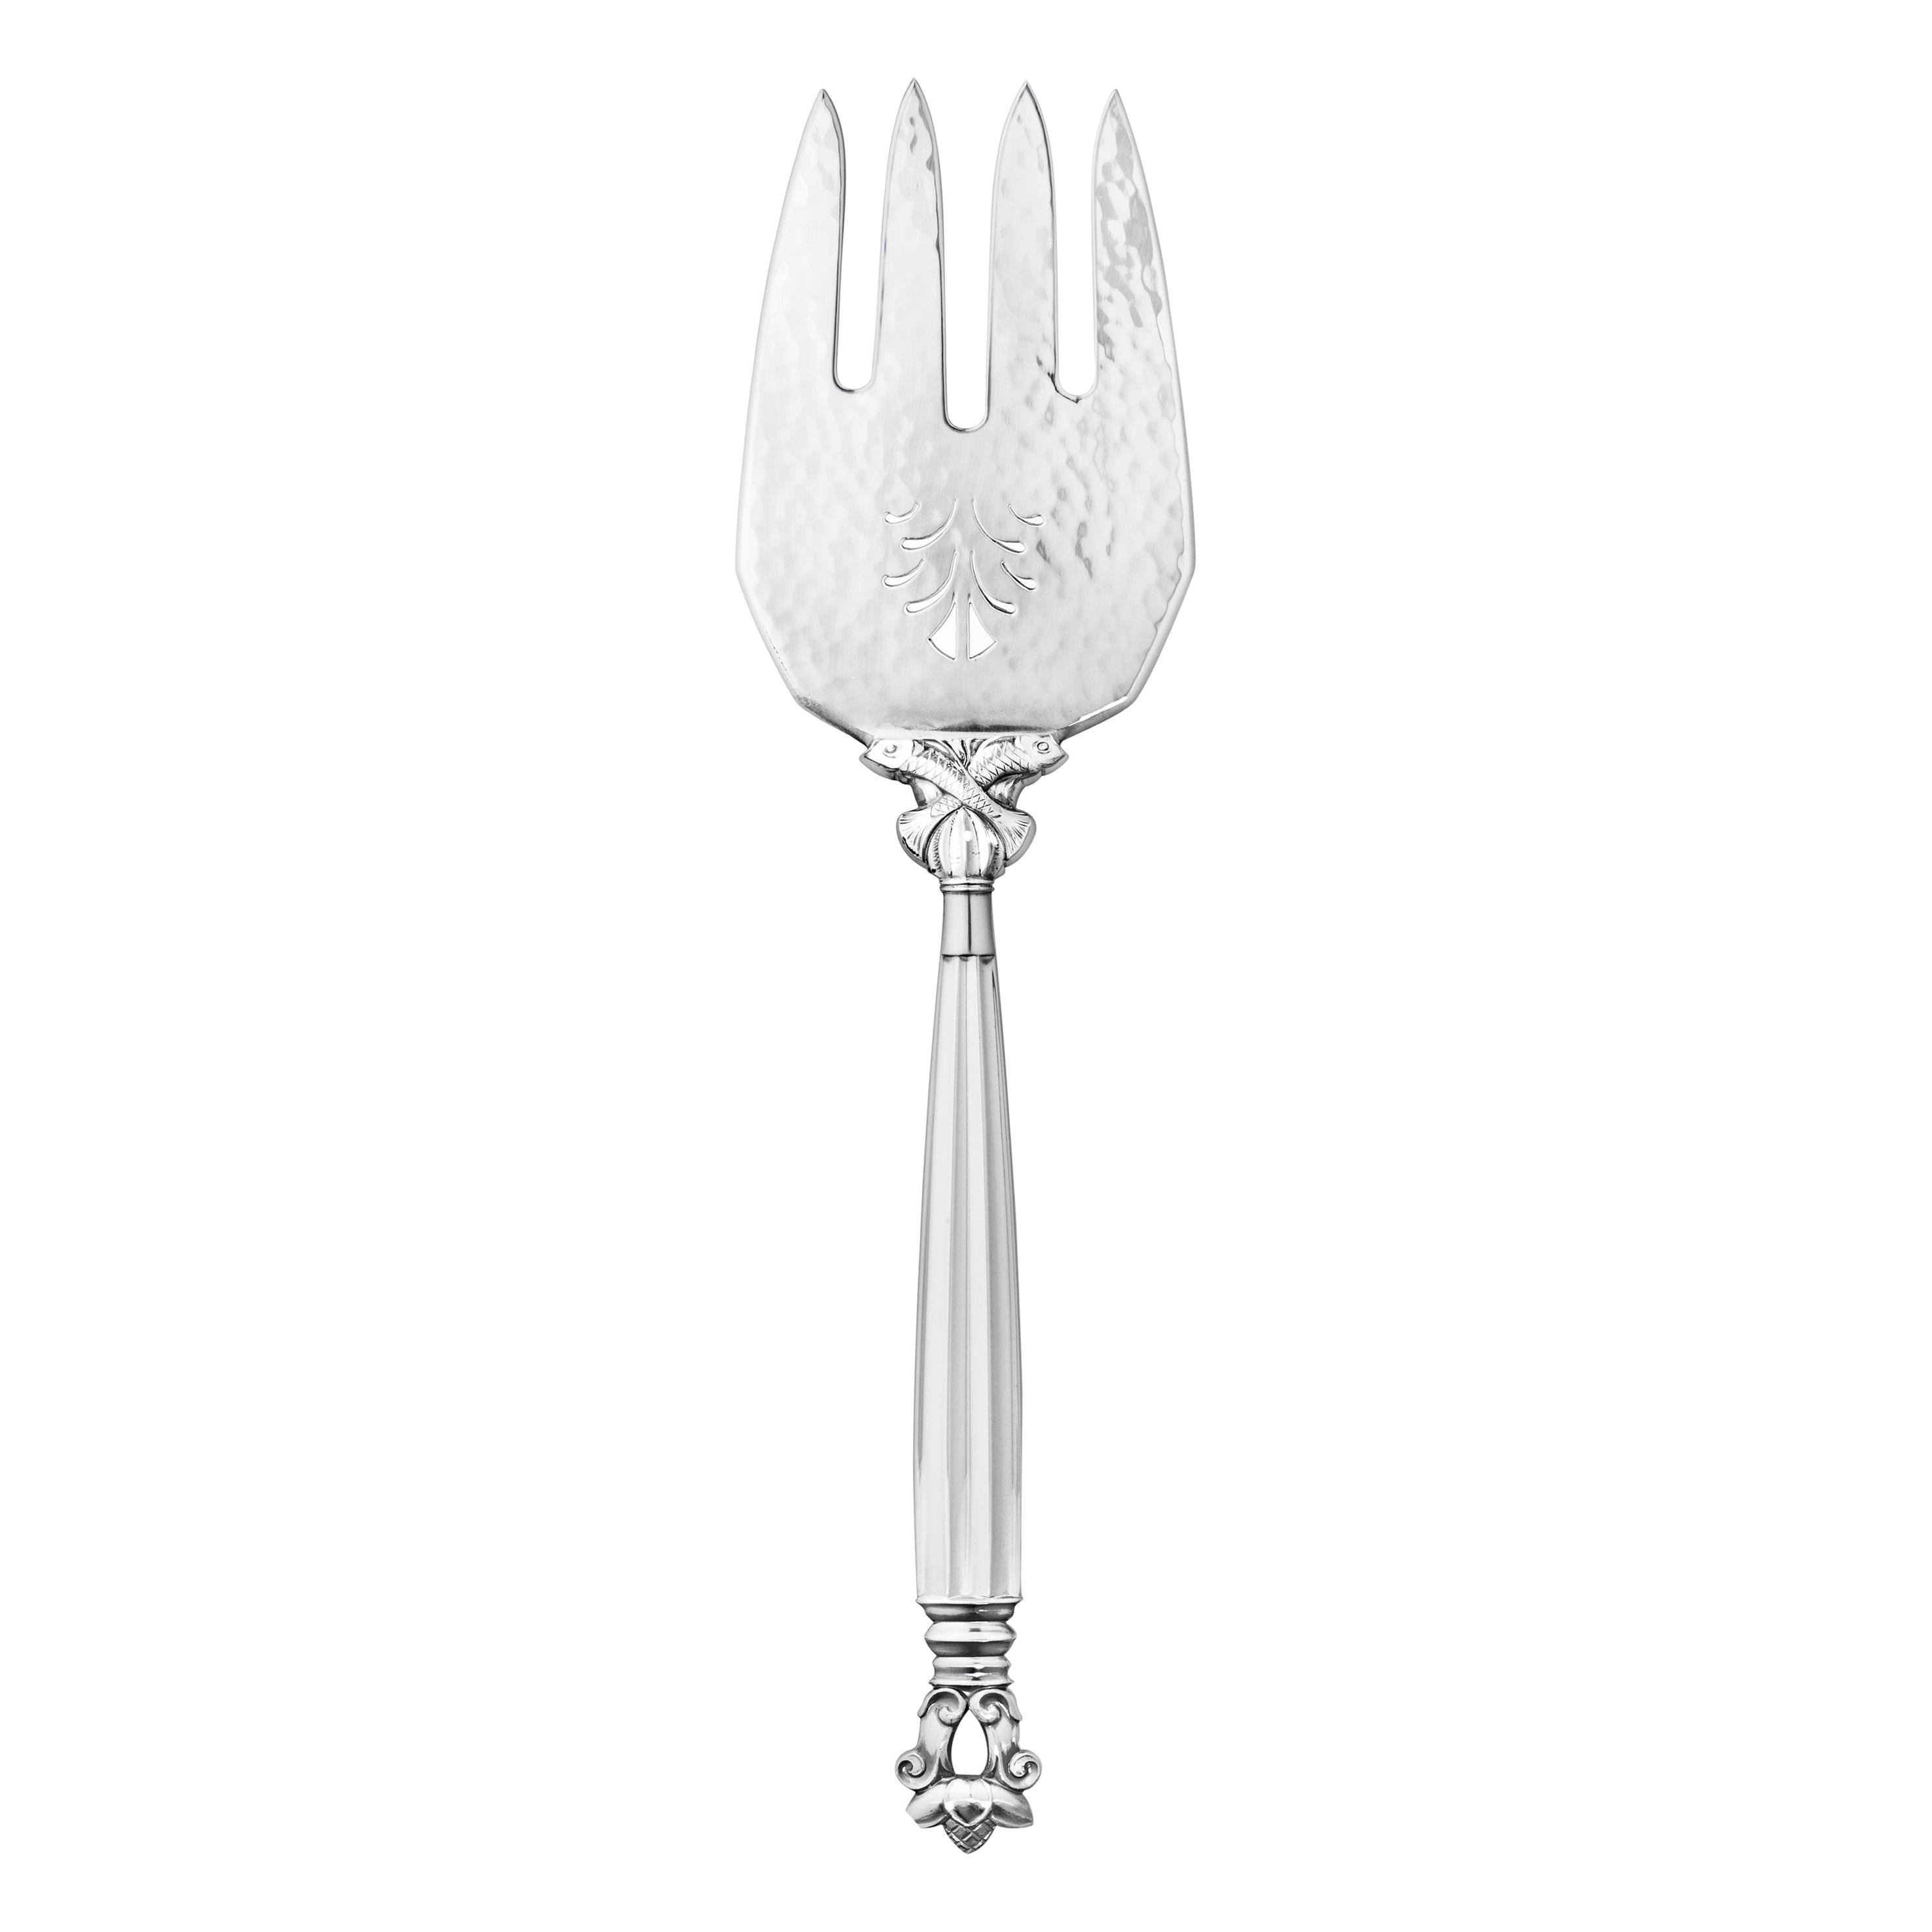 Georg Jensen Sterling Silver Acorn Fish Serving Fork by Johan Rohde For Sale